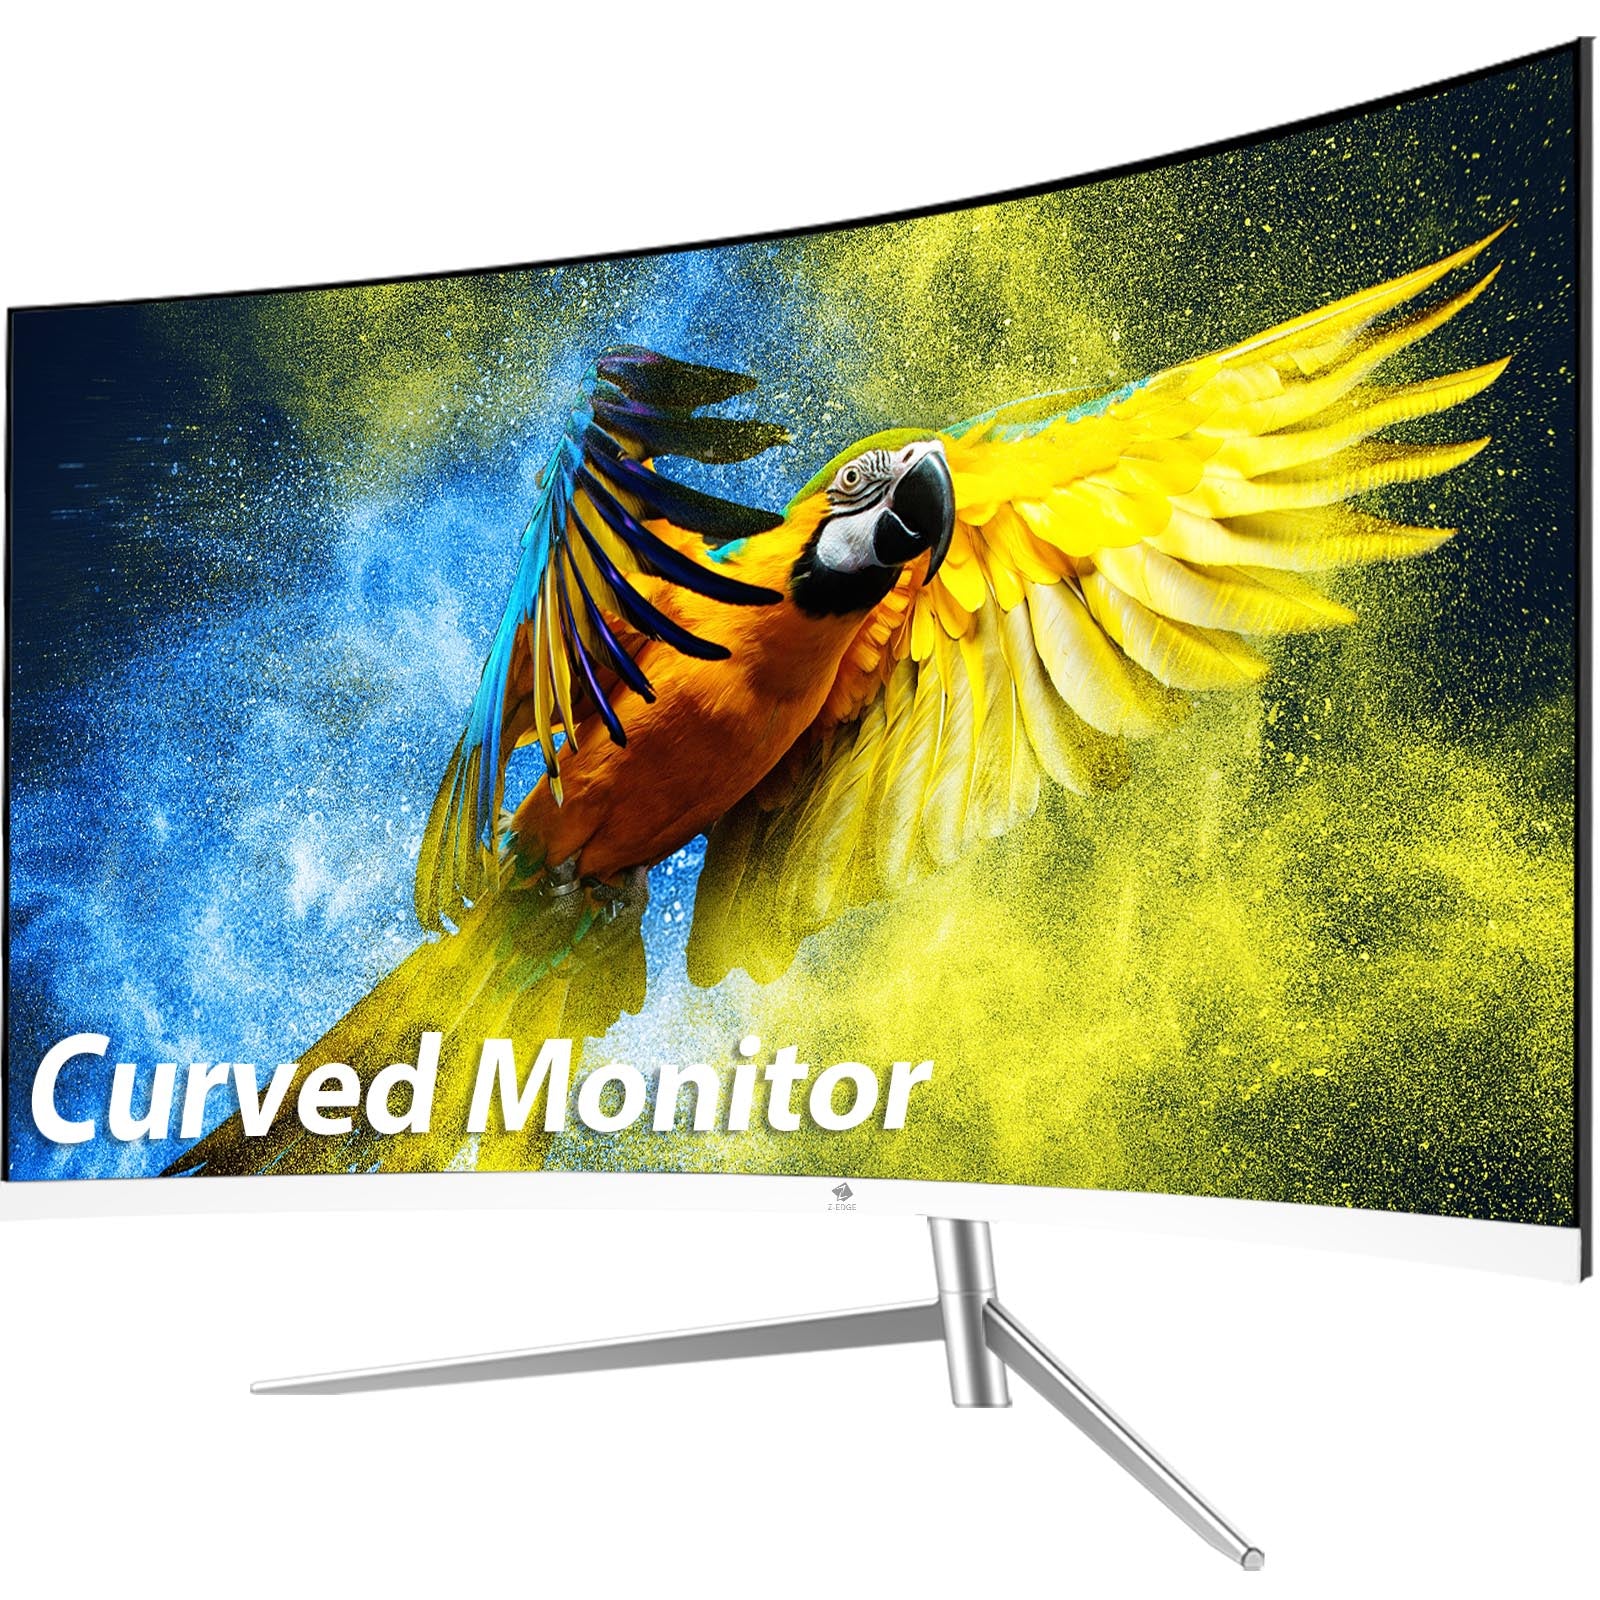 CRUA 24 Inch 144hz/180hz Curved Gaming Monitor, FHD 1080P Frameless  Computer Monitors, Support AMD freesync Low Motion Blur, Eye Care,  DisplayPort